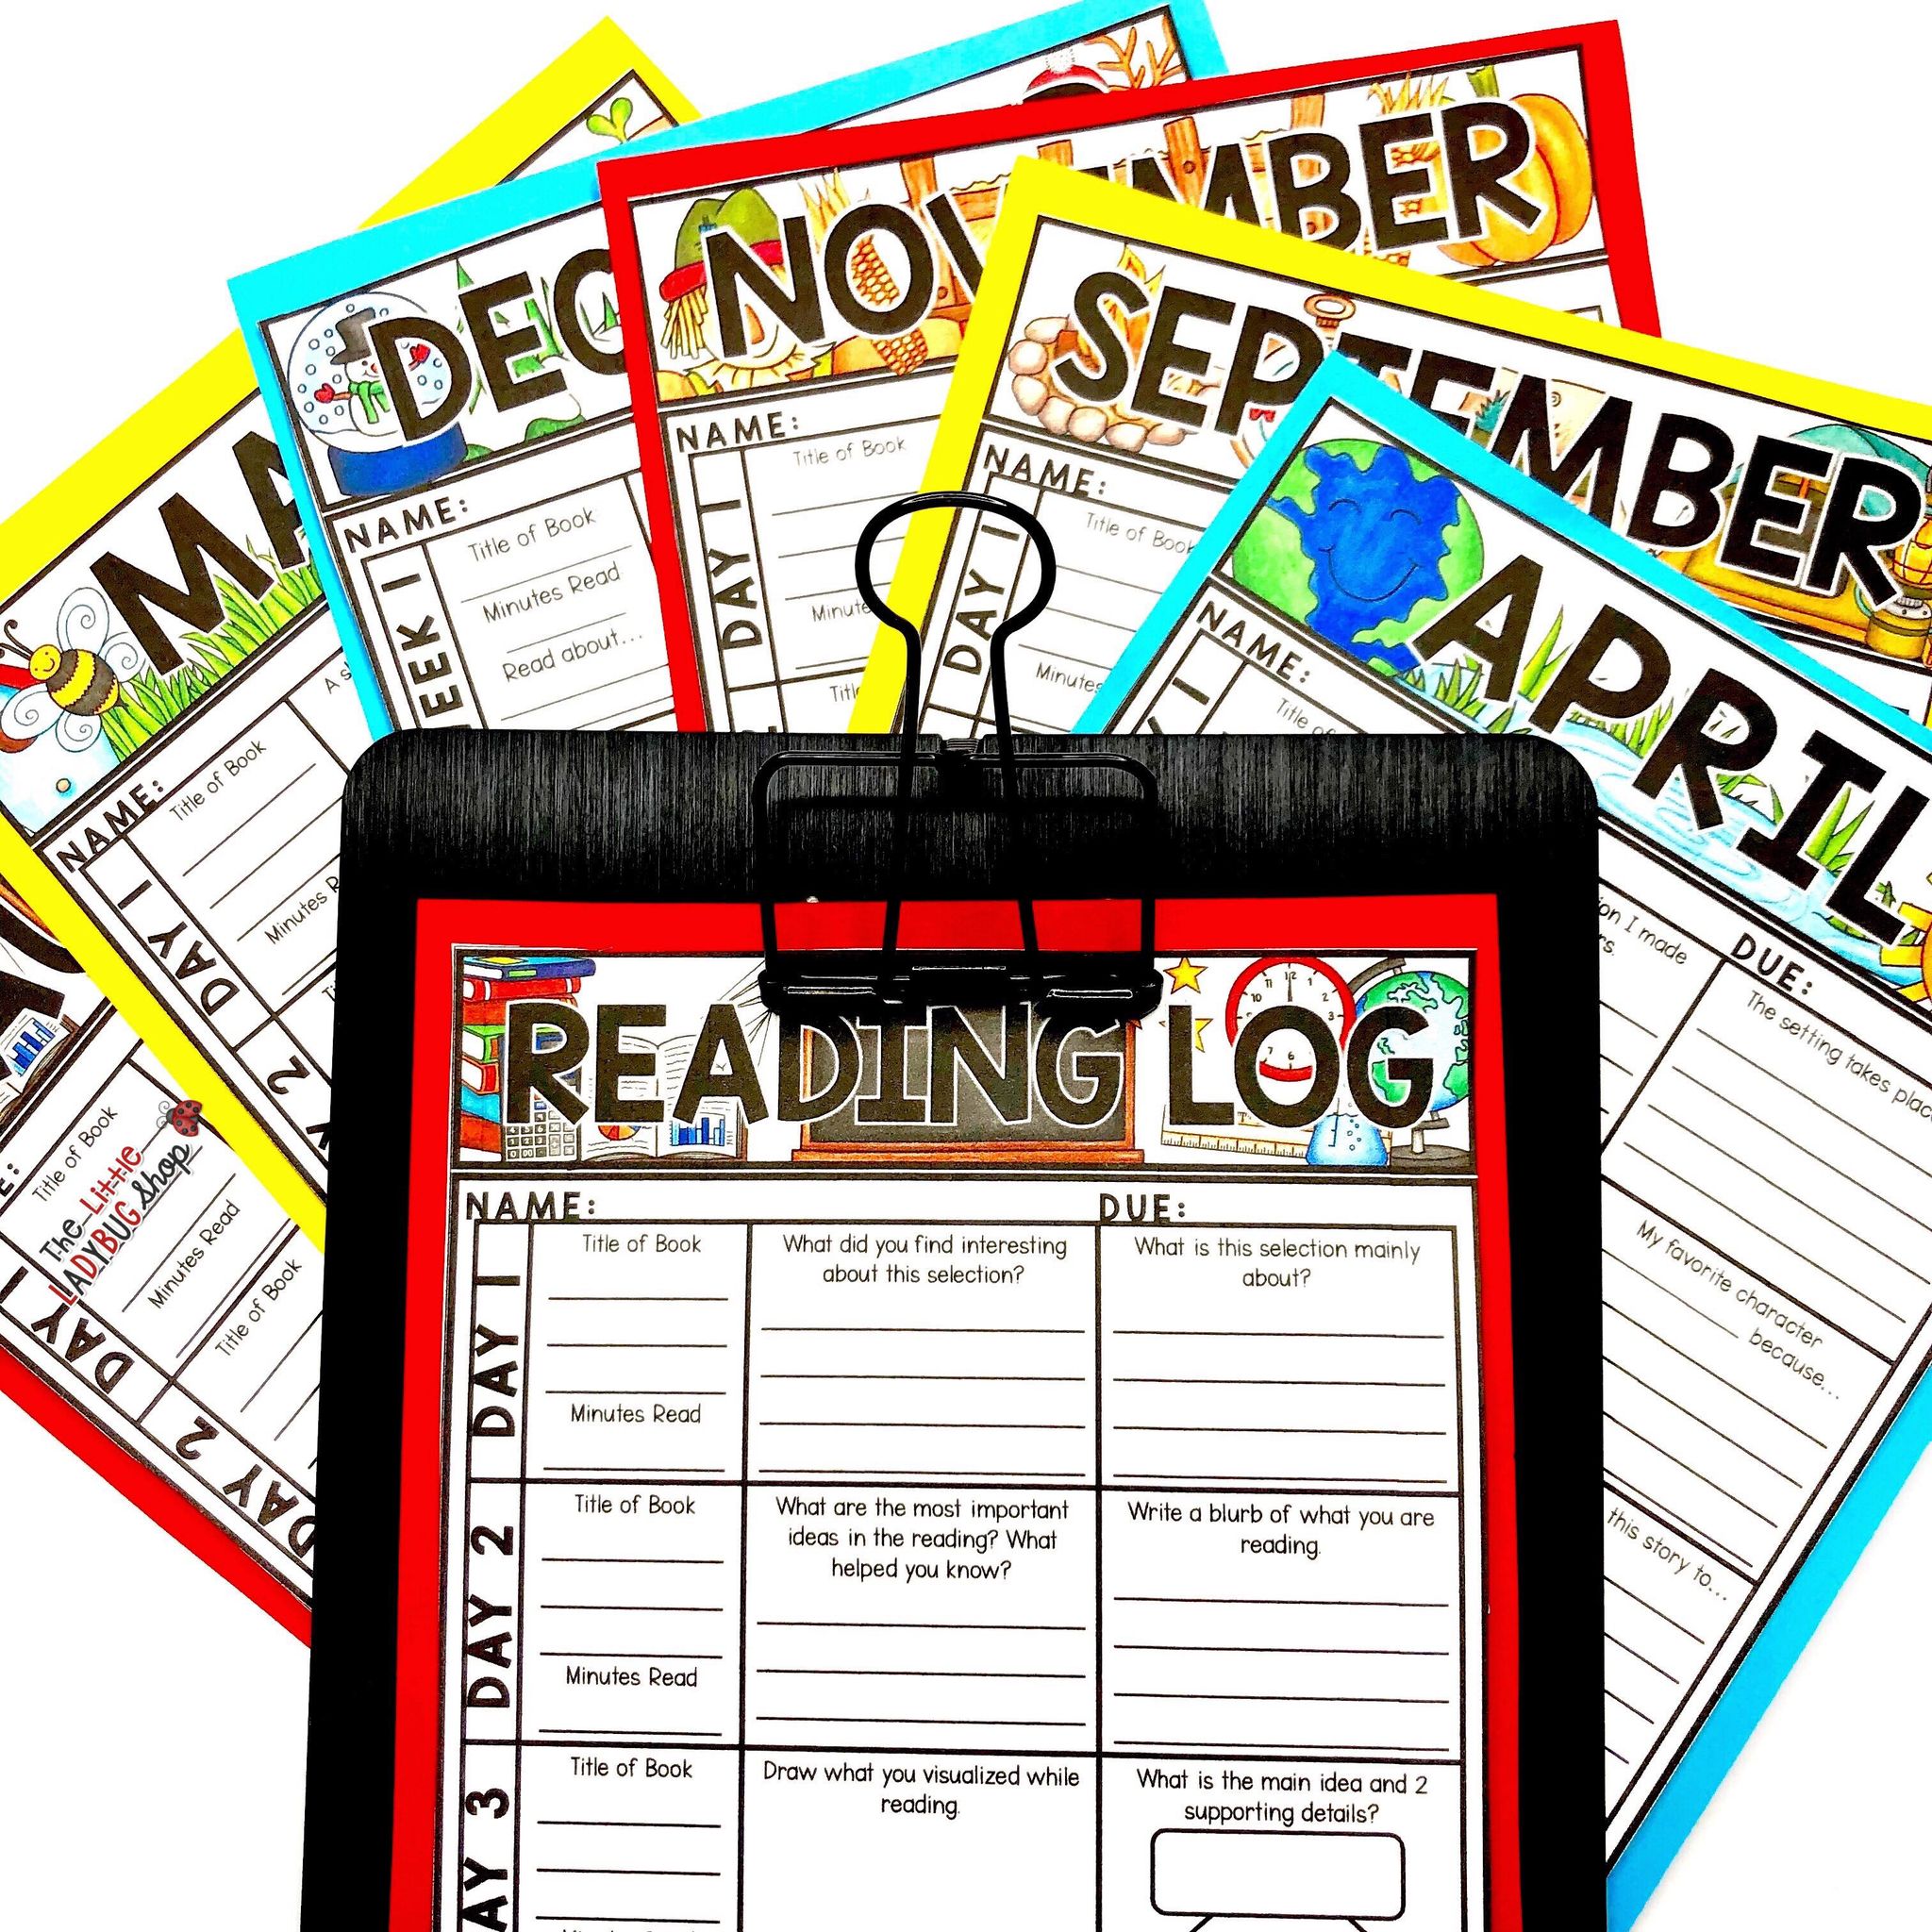 Using Fiction & Nonfiction Reading Logs in Upper Elementary